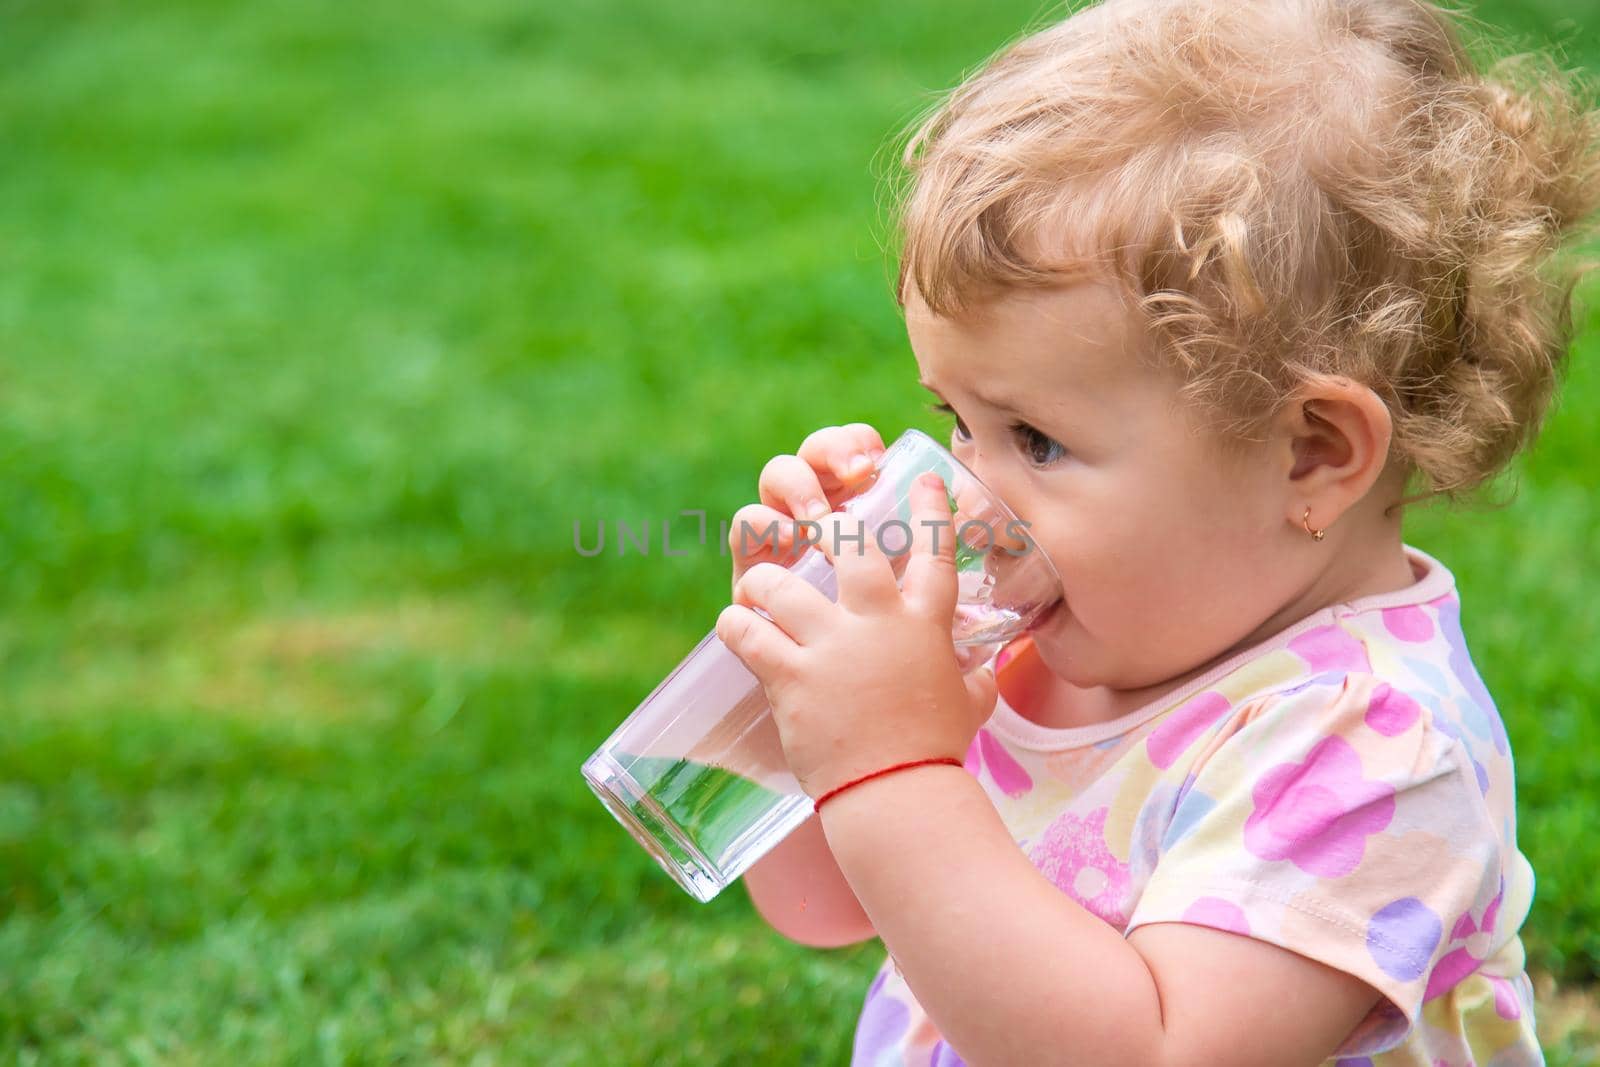 Baby drinks water from a glass. Selective focus. Child.